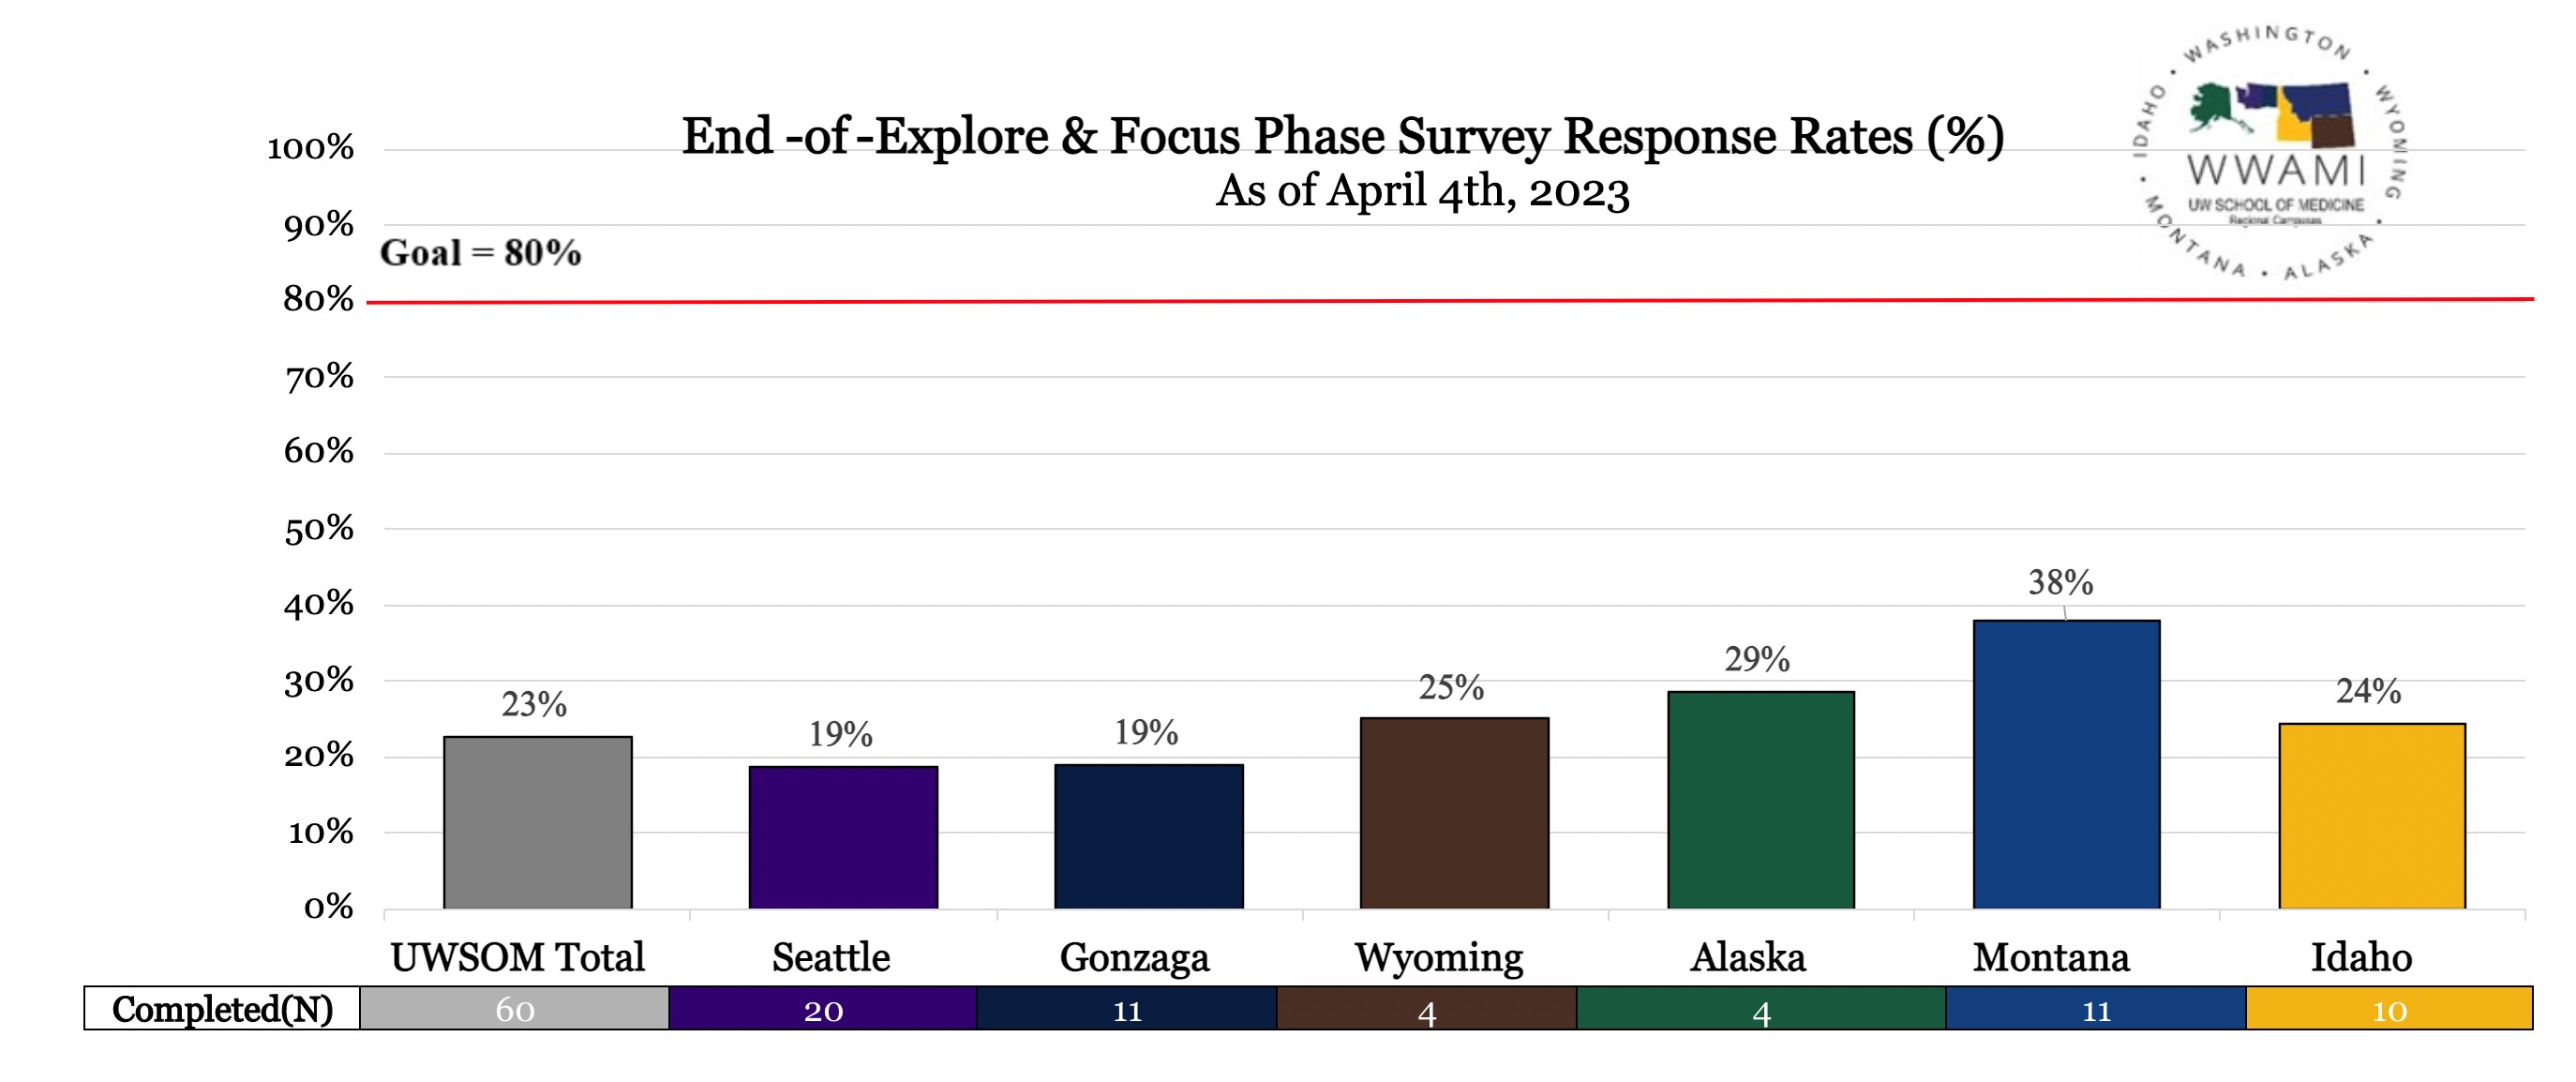 Graph showing End-of-Explore & Focus Phase Survey Response Rates in percentages.